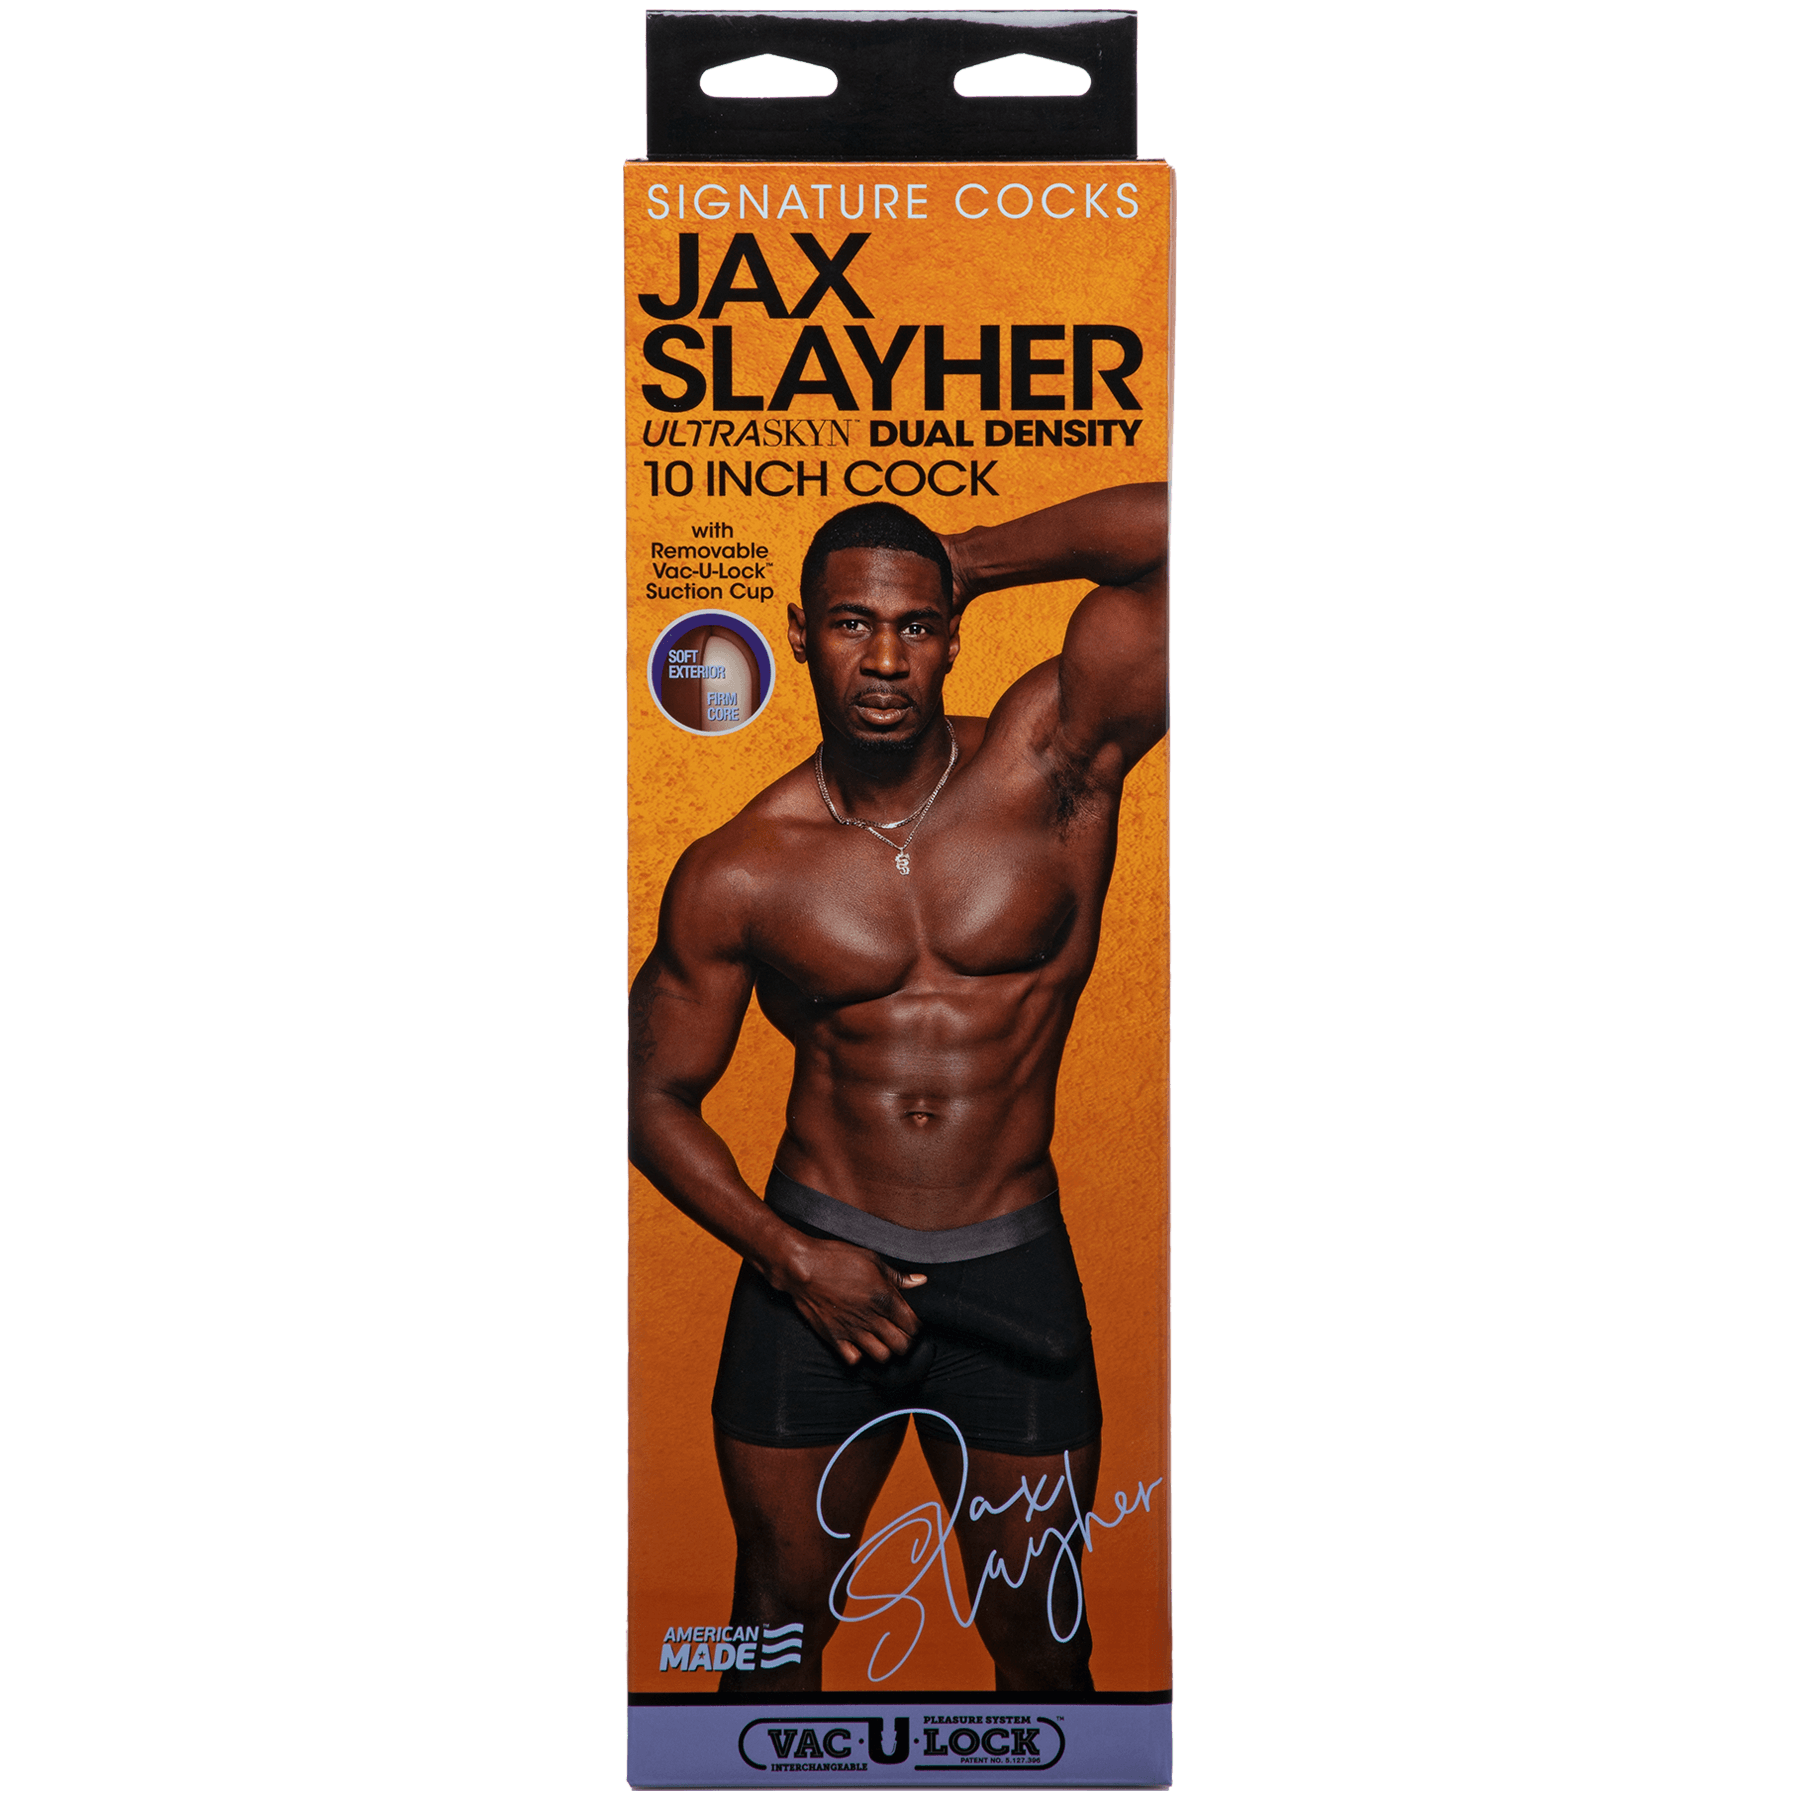 Doc Johnson Signature Cock Jax Slayher 10in Cock - Buy At Luxury Toy X - Free 3-Day Shipping